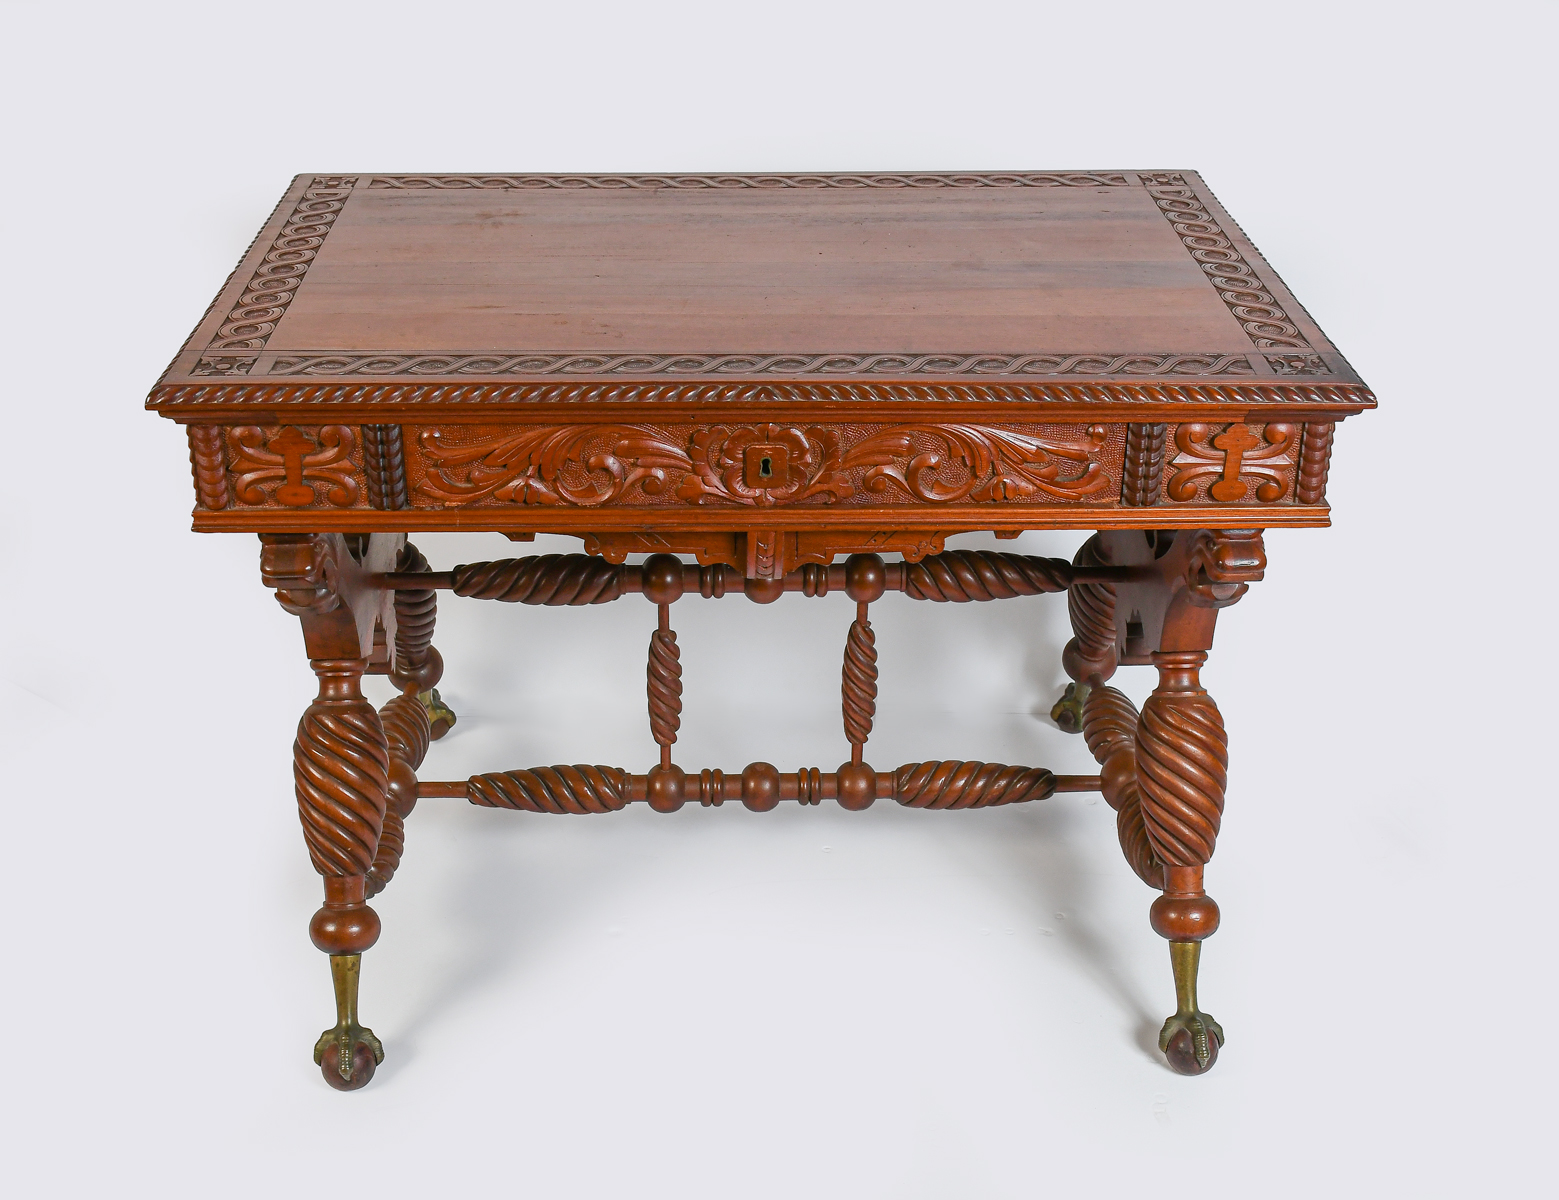 HIGHLY CARVED CLAWFOOT DESK: Victorian